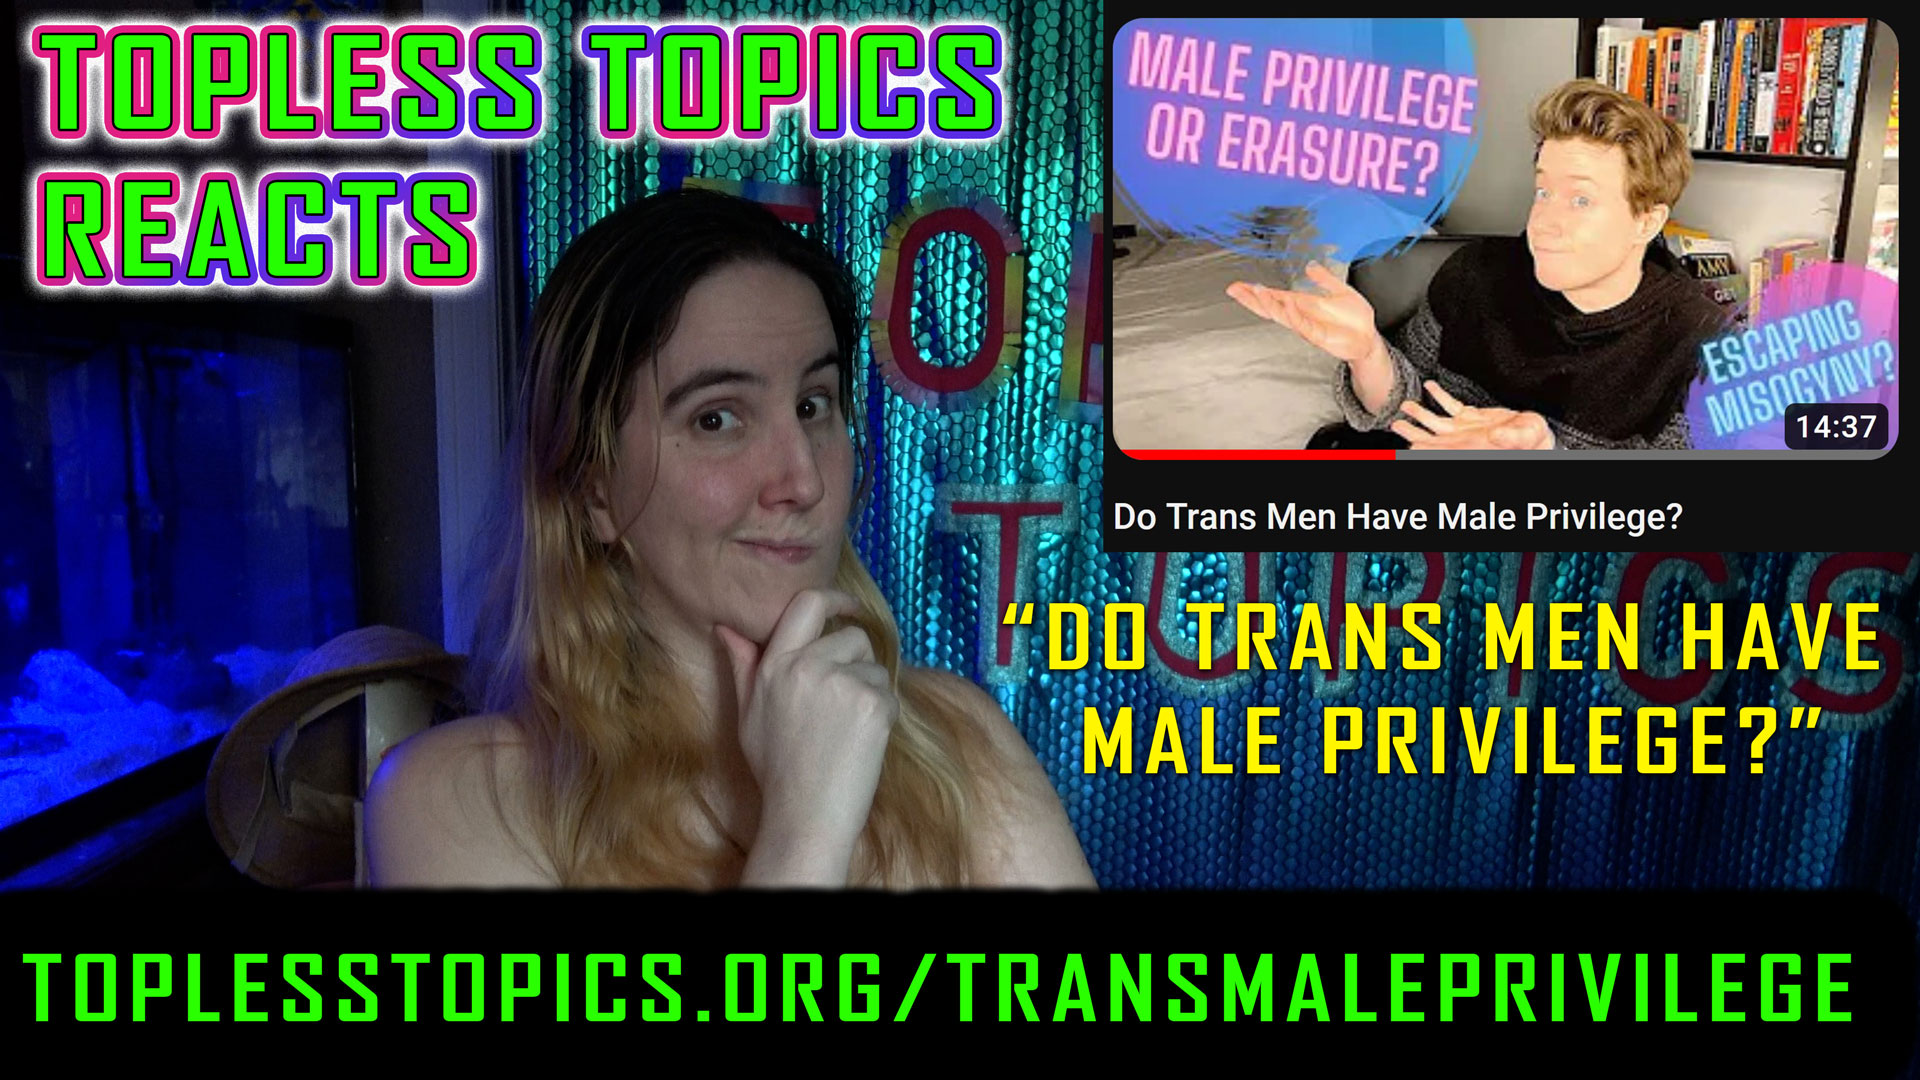 Topless Topics Reacts: Do Trans Men Have Male Privilege?